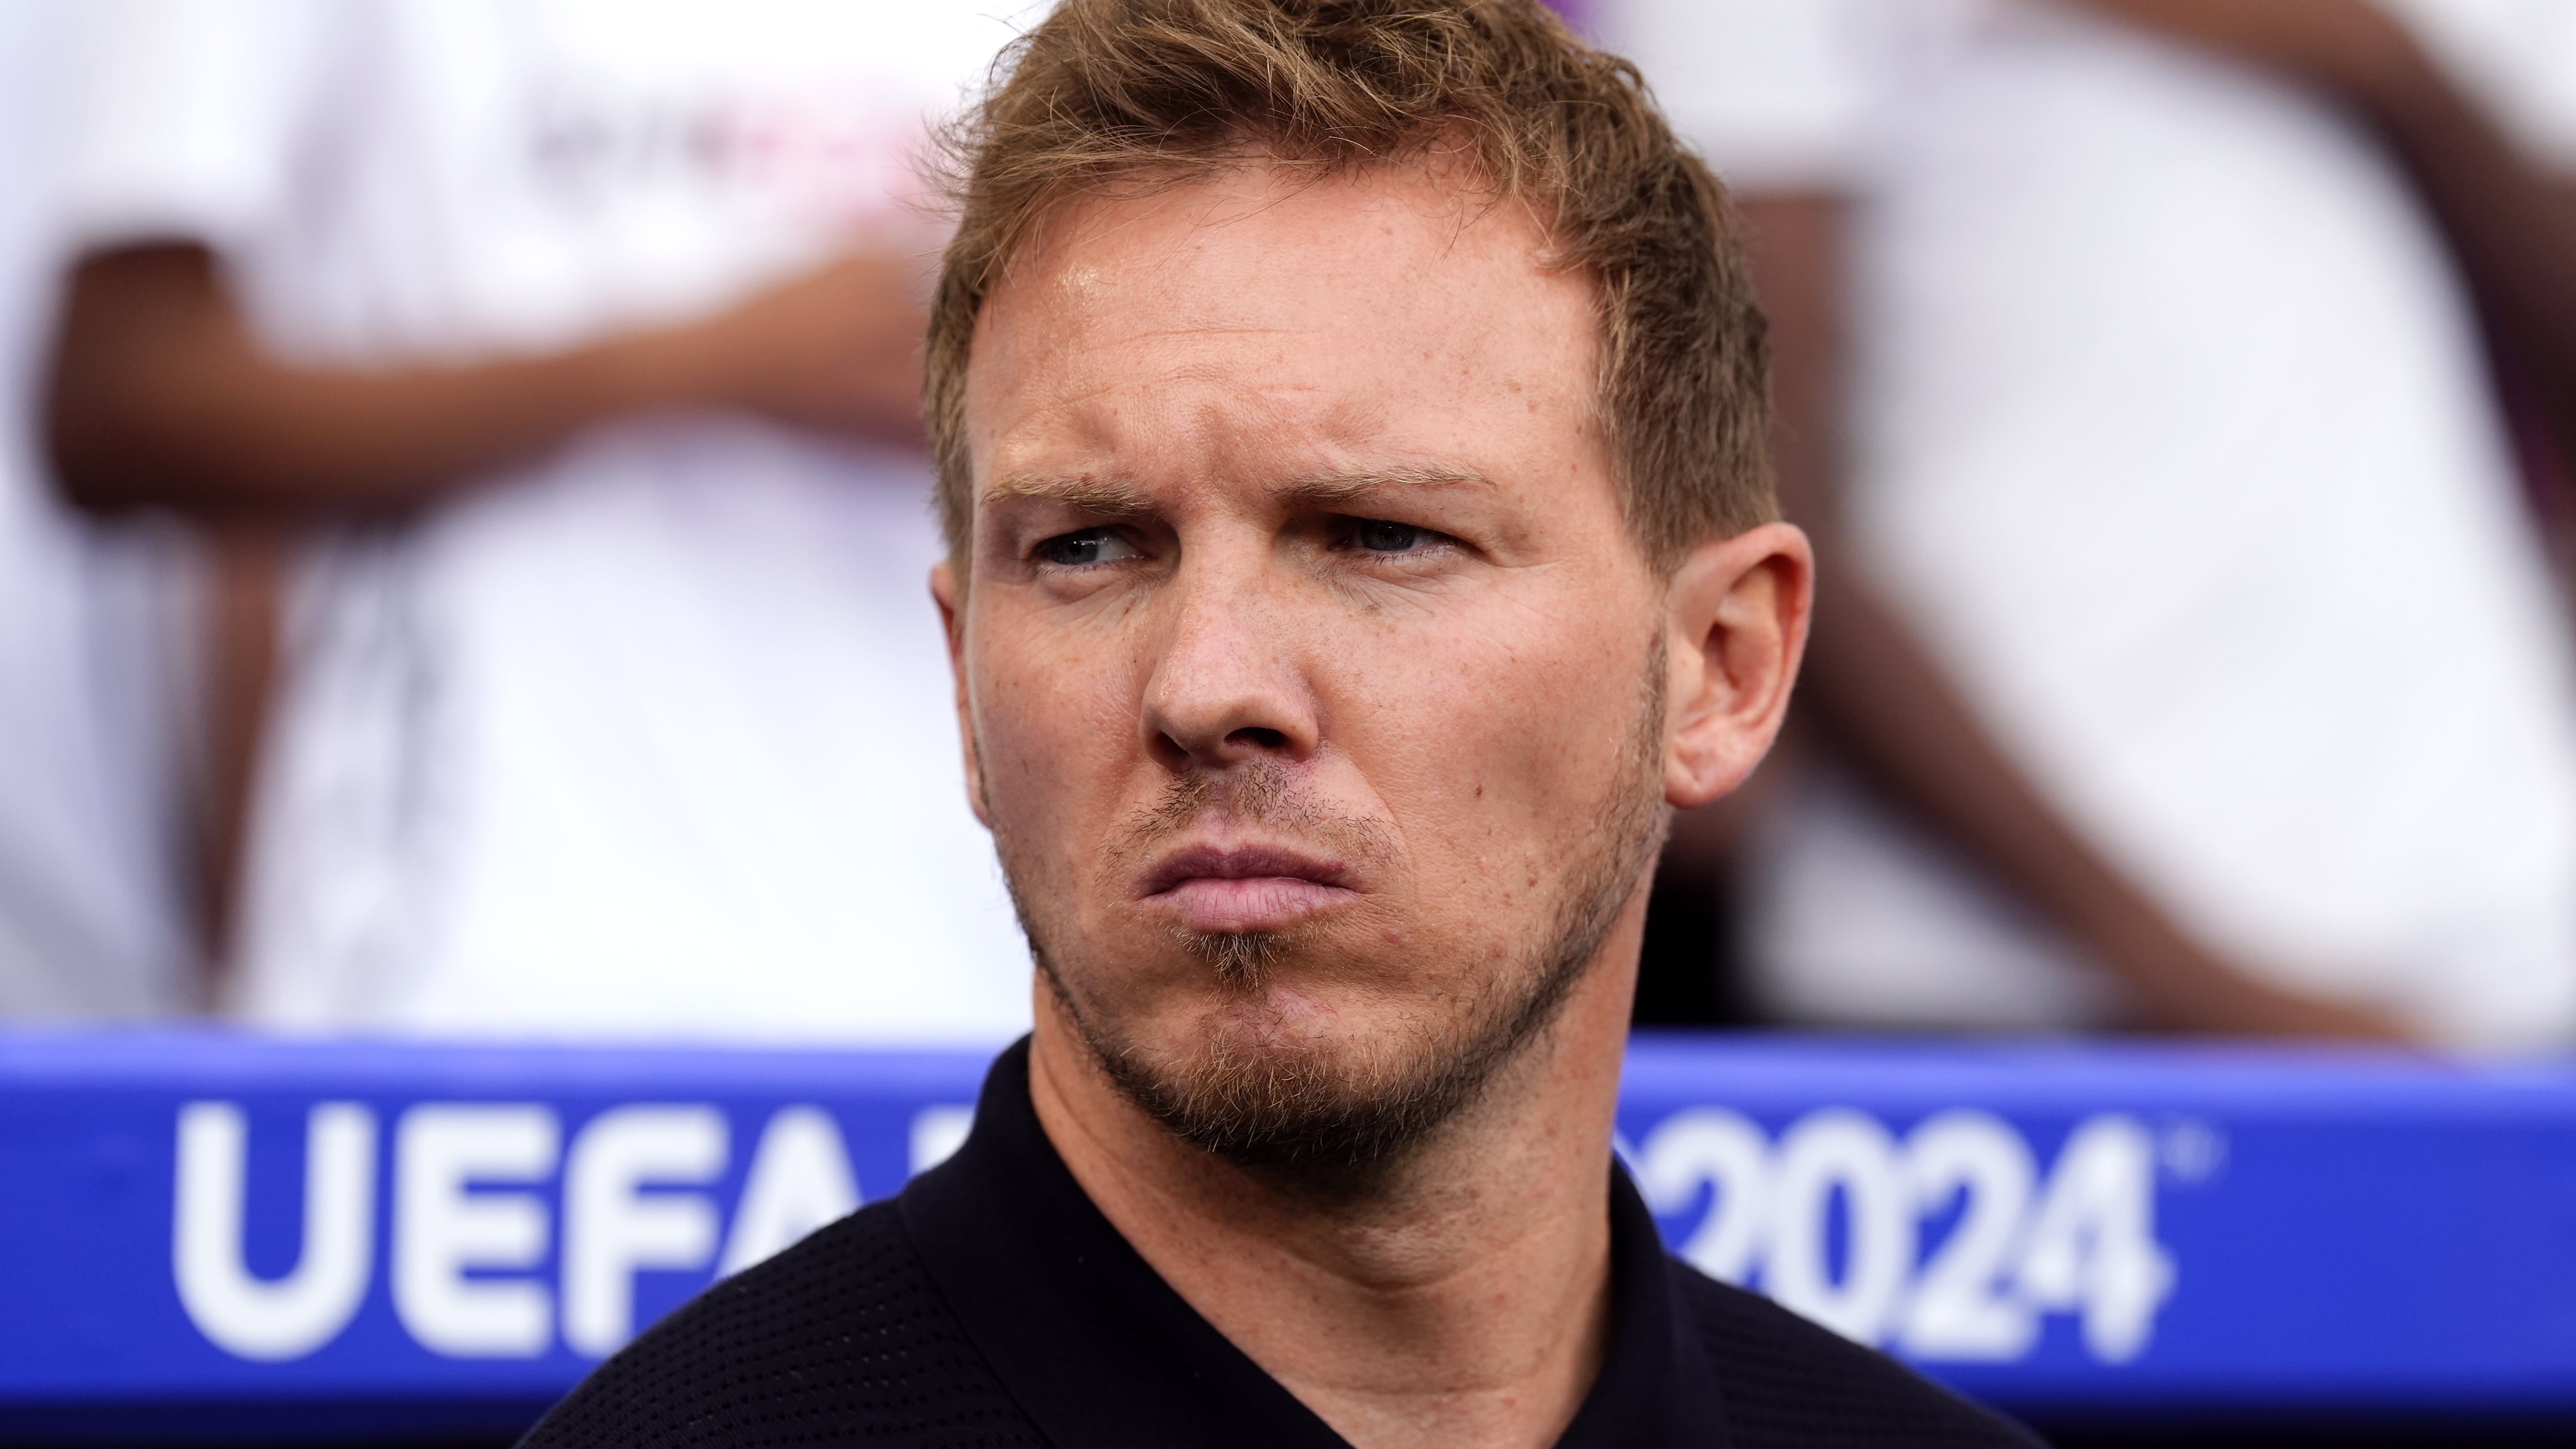 Germany manager Julian Nagelsmann feels his squad are well prepared for the knockout stage on home soil